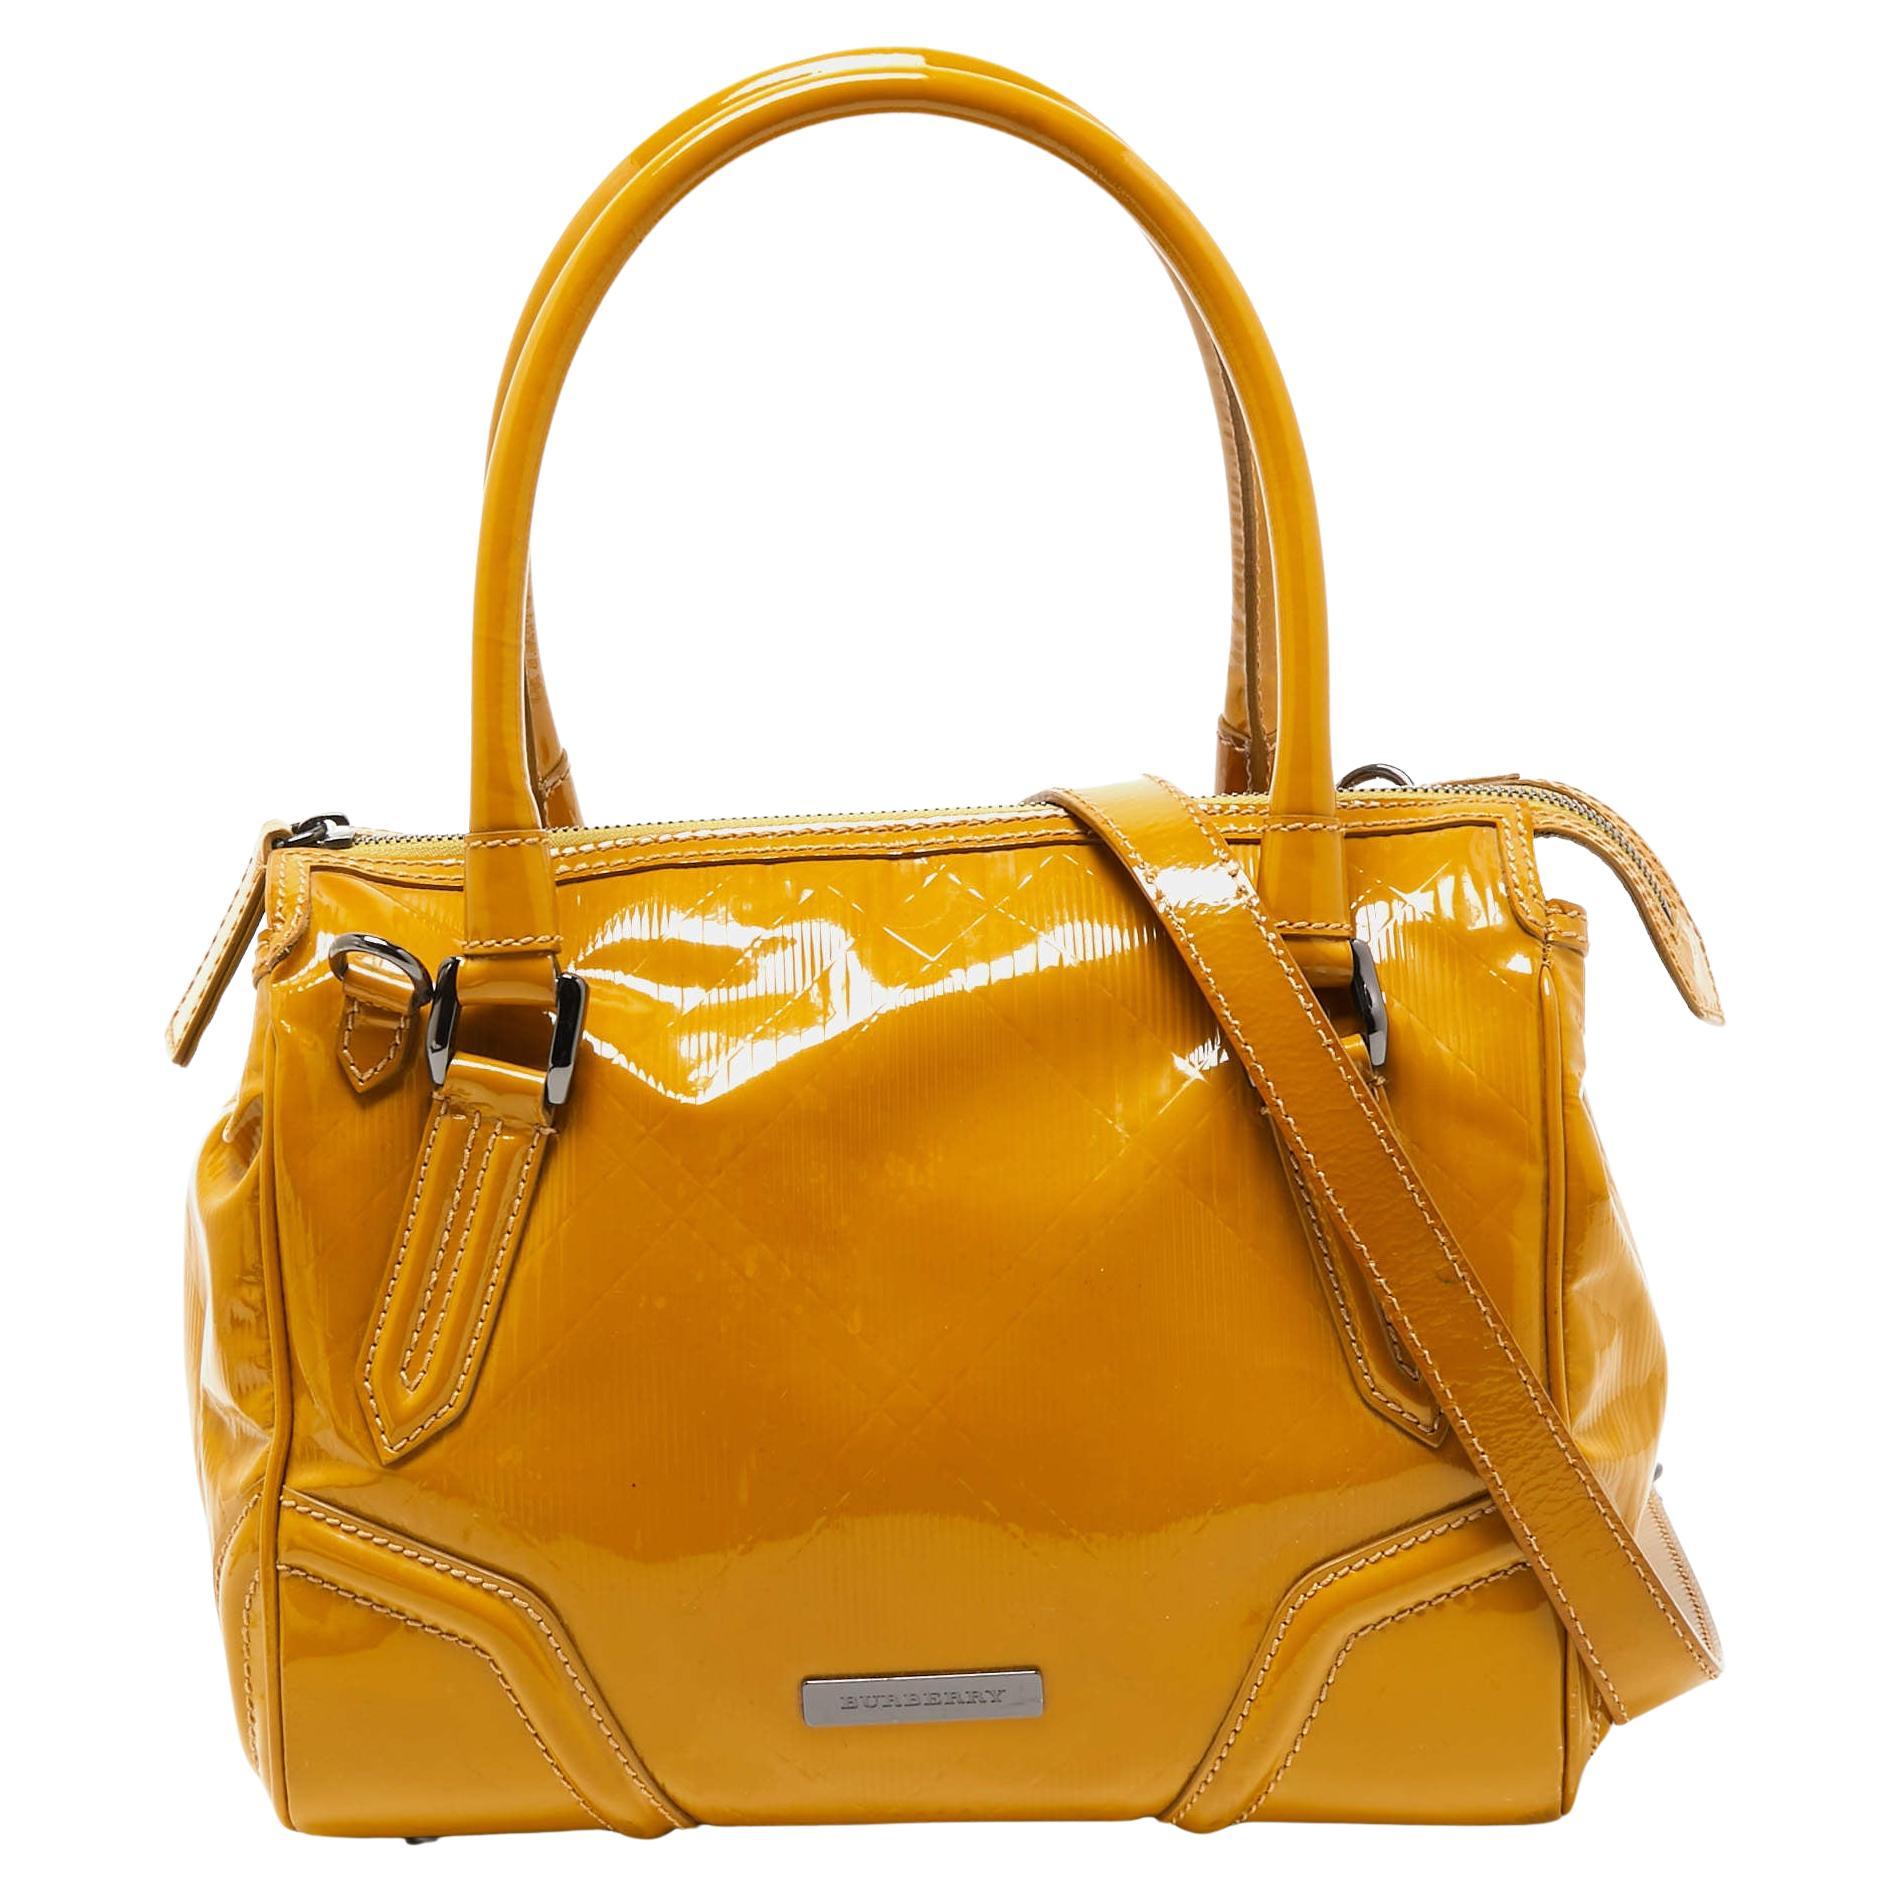 Burberry Mustard Patent Leather Top Zip Tote